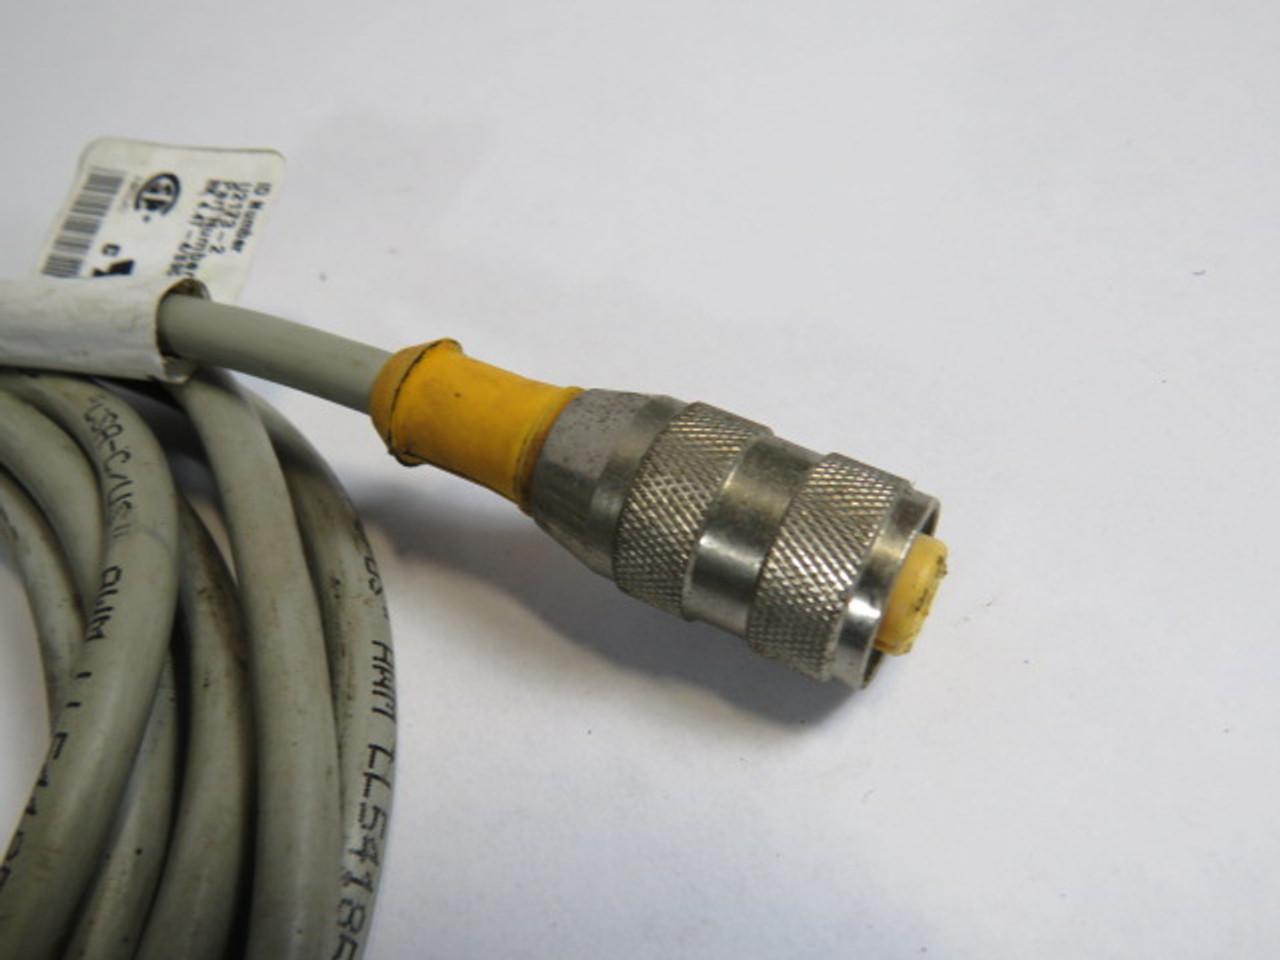 Turck RK-4.4T-4/S90 U2173-2 Cable Connector USED